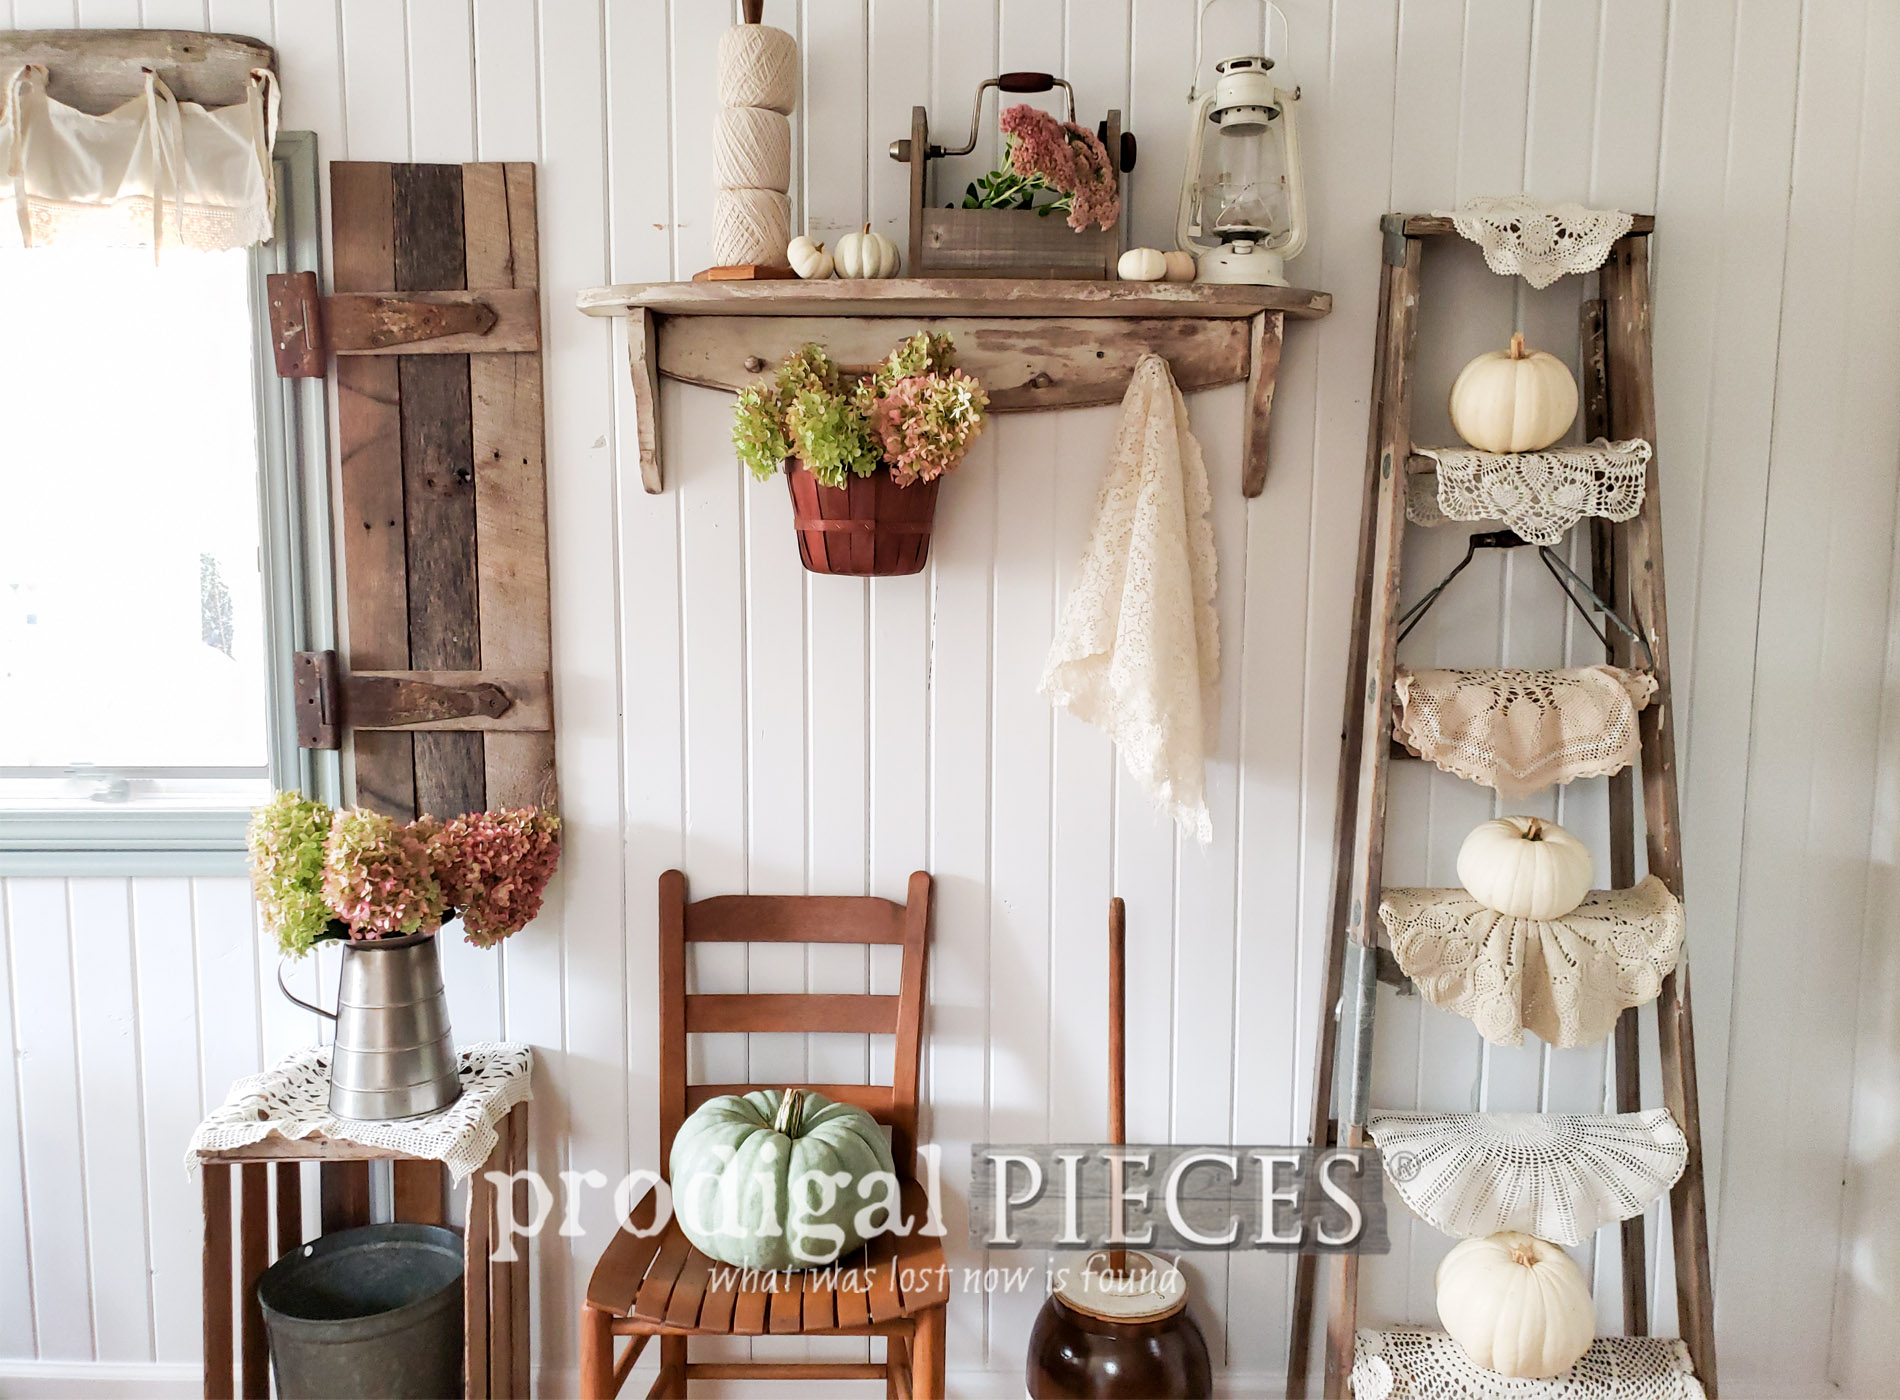 Featured Fall Fall Vignette from Thrifted Finds by Larissa of Prodigal Pieces with video tutorial | Head to prodigalpieces.com #prodigalpieces #diy #home #homedecor #farmhouse #fall #autumn